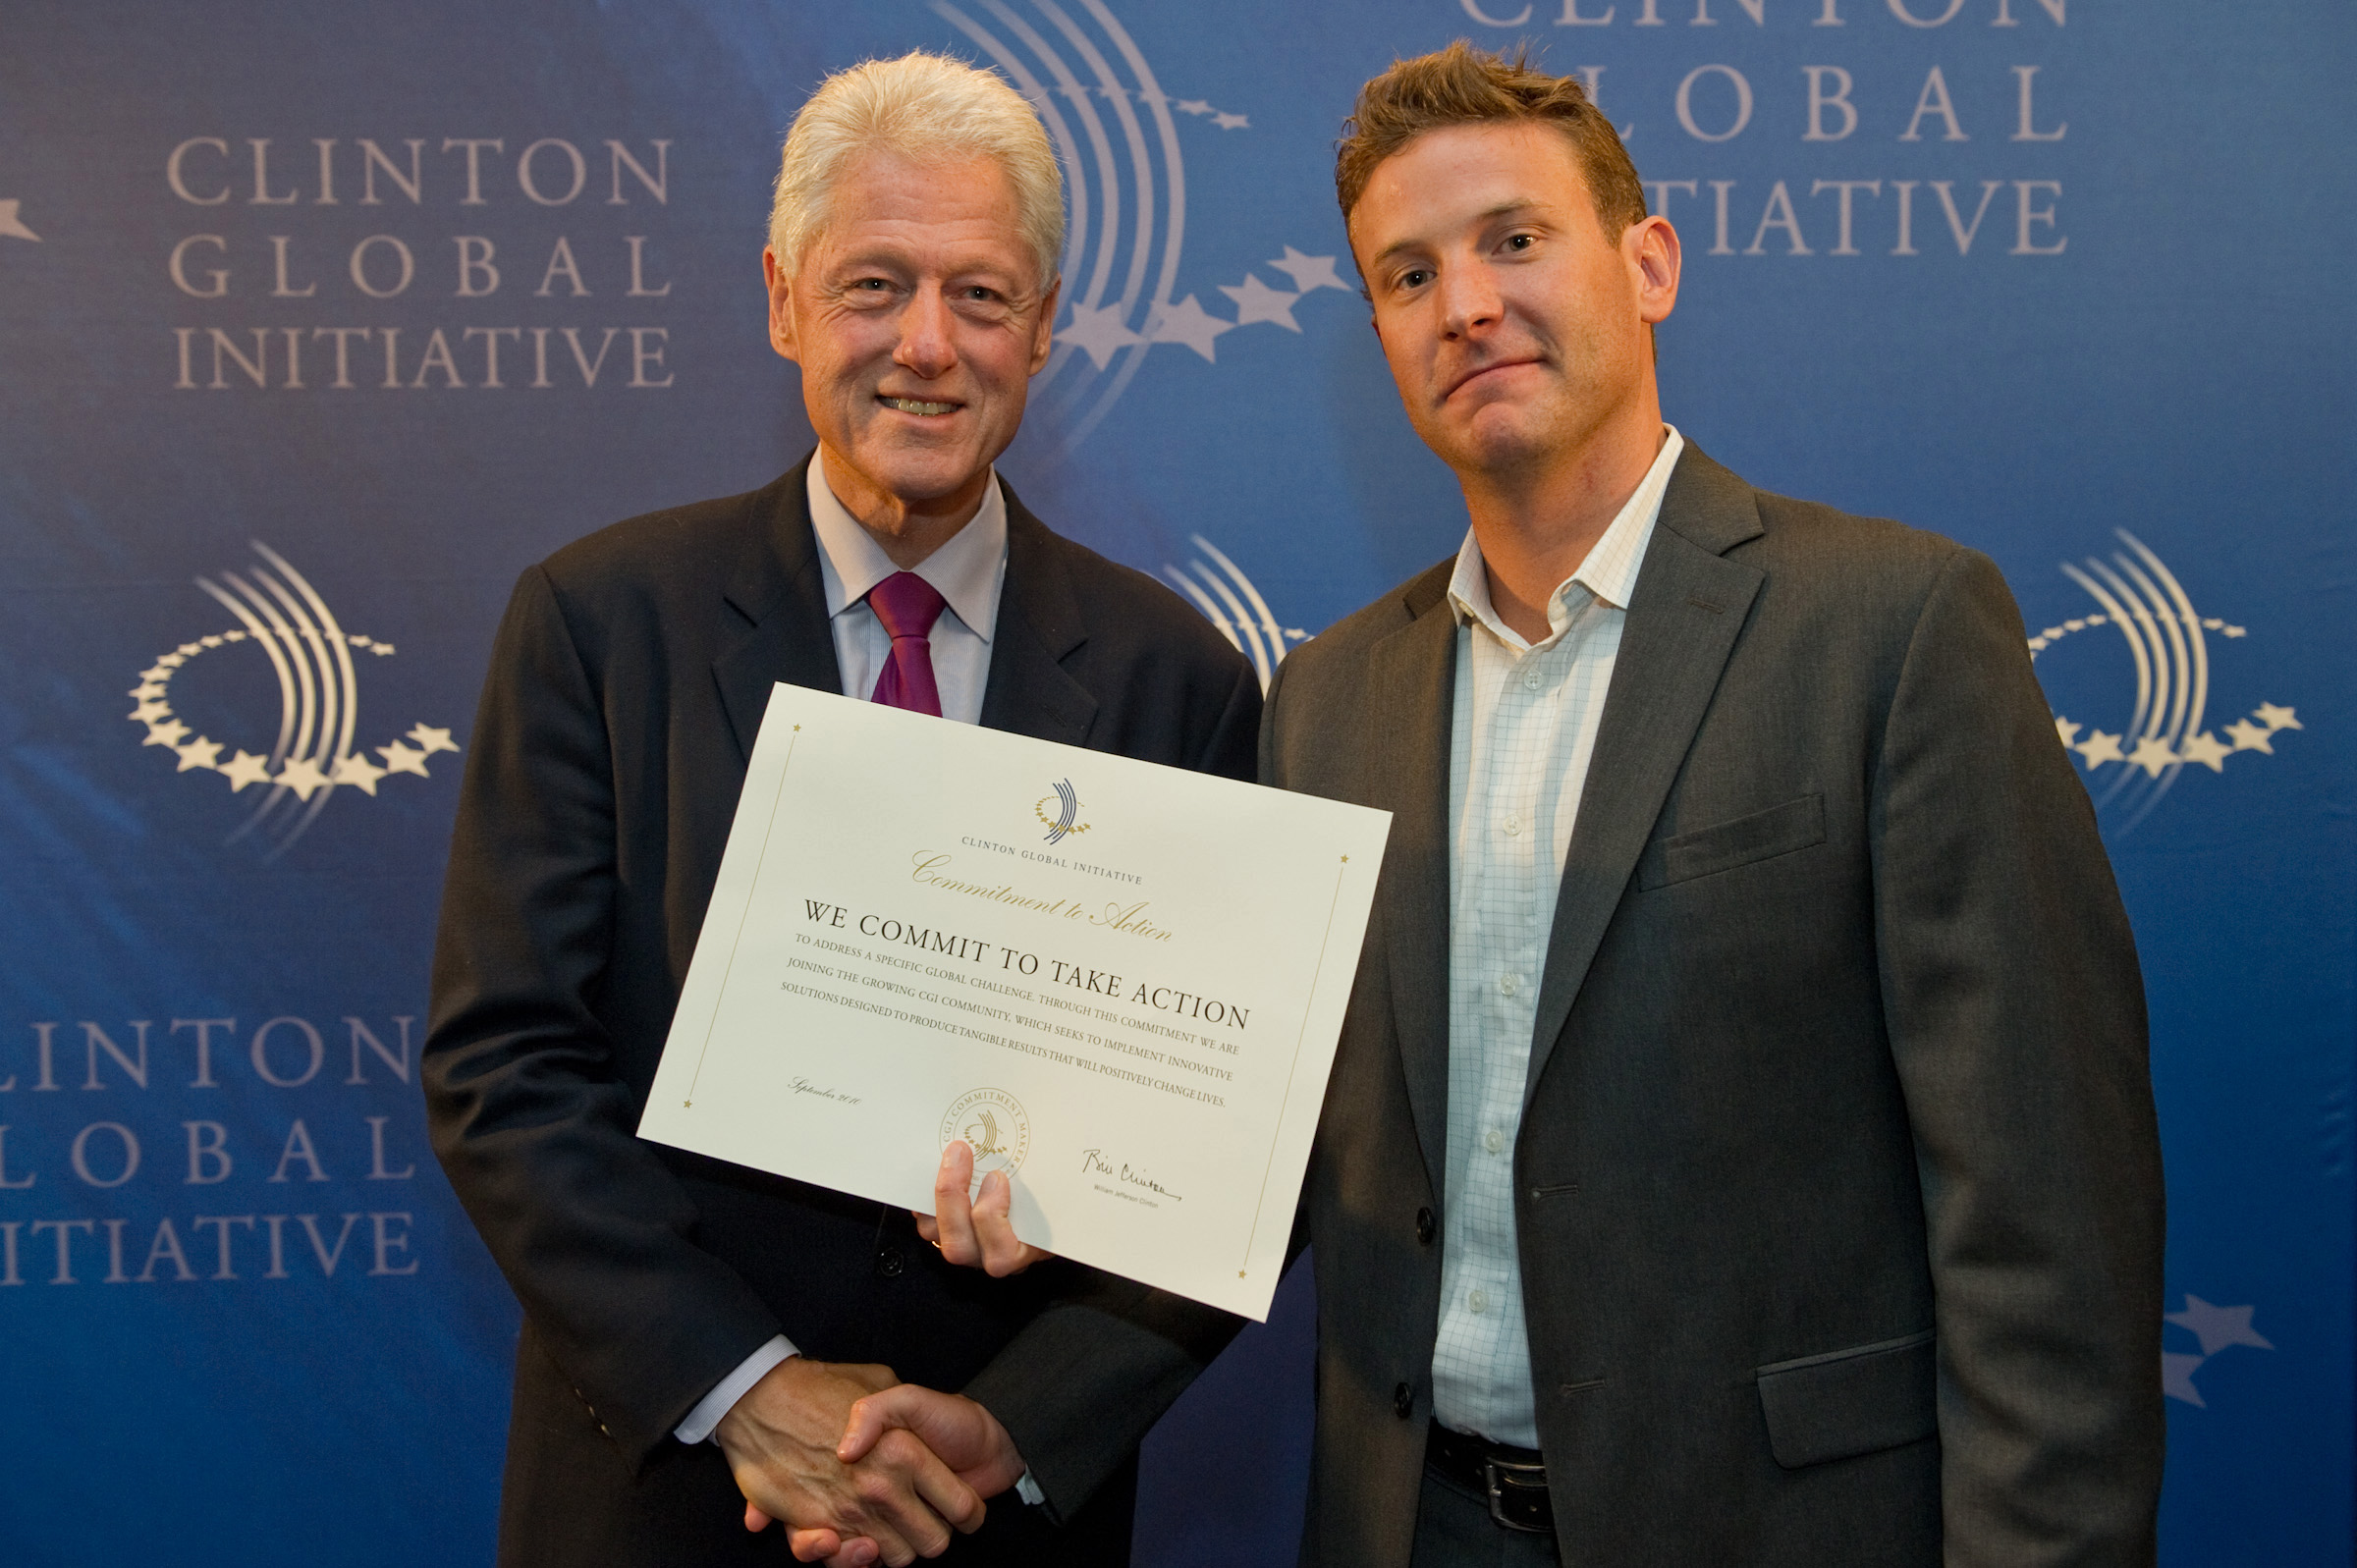 Jason Spindler meets President Clinton at the Clinton Global Initiative 